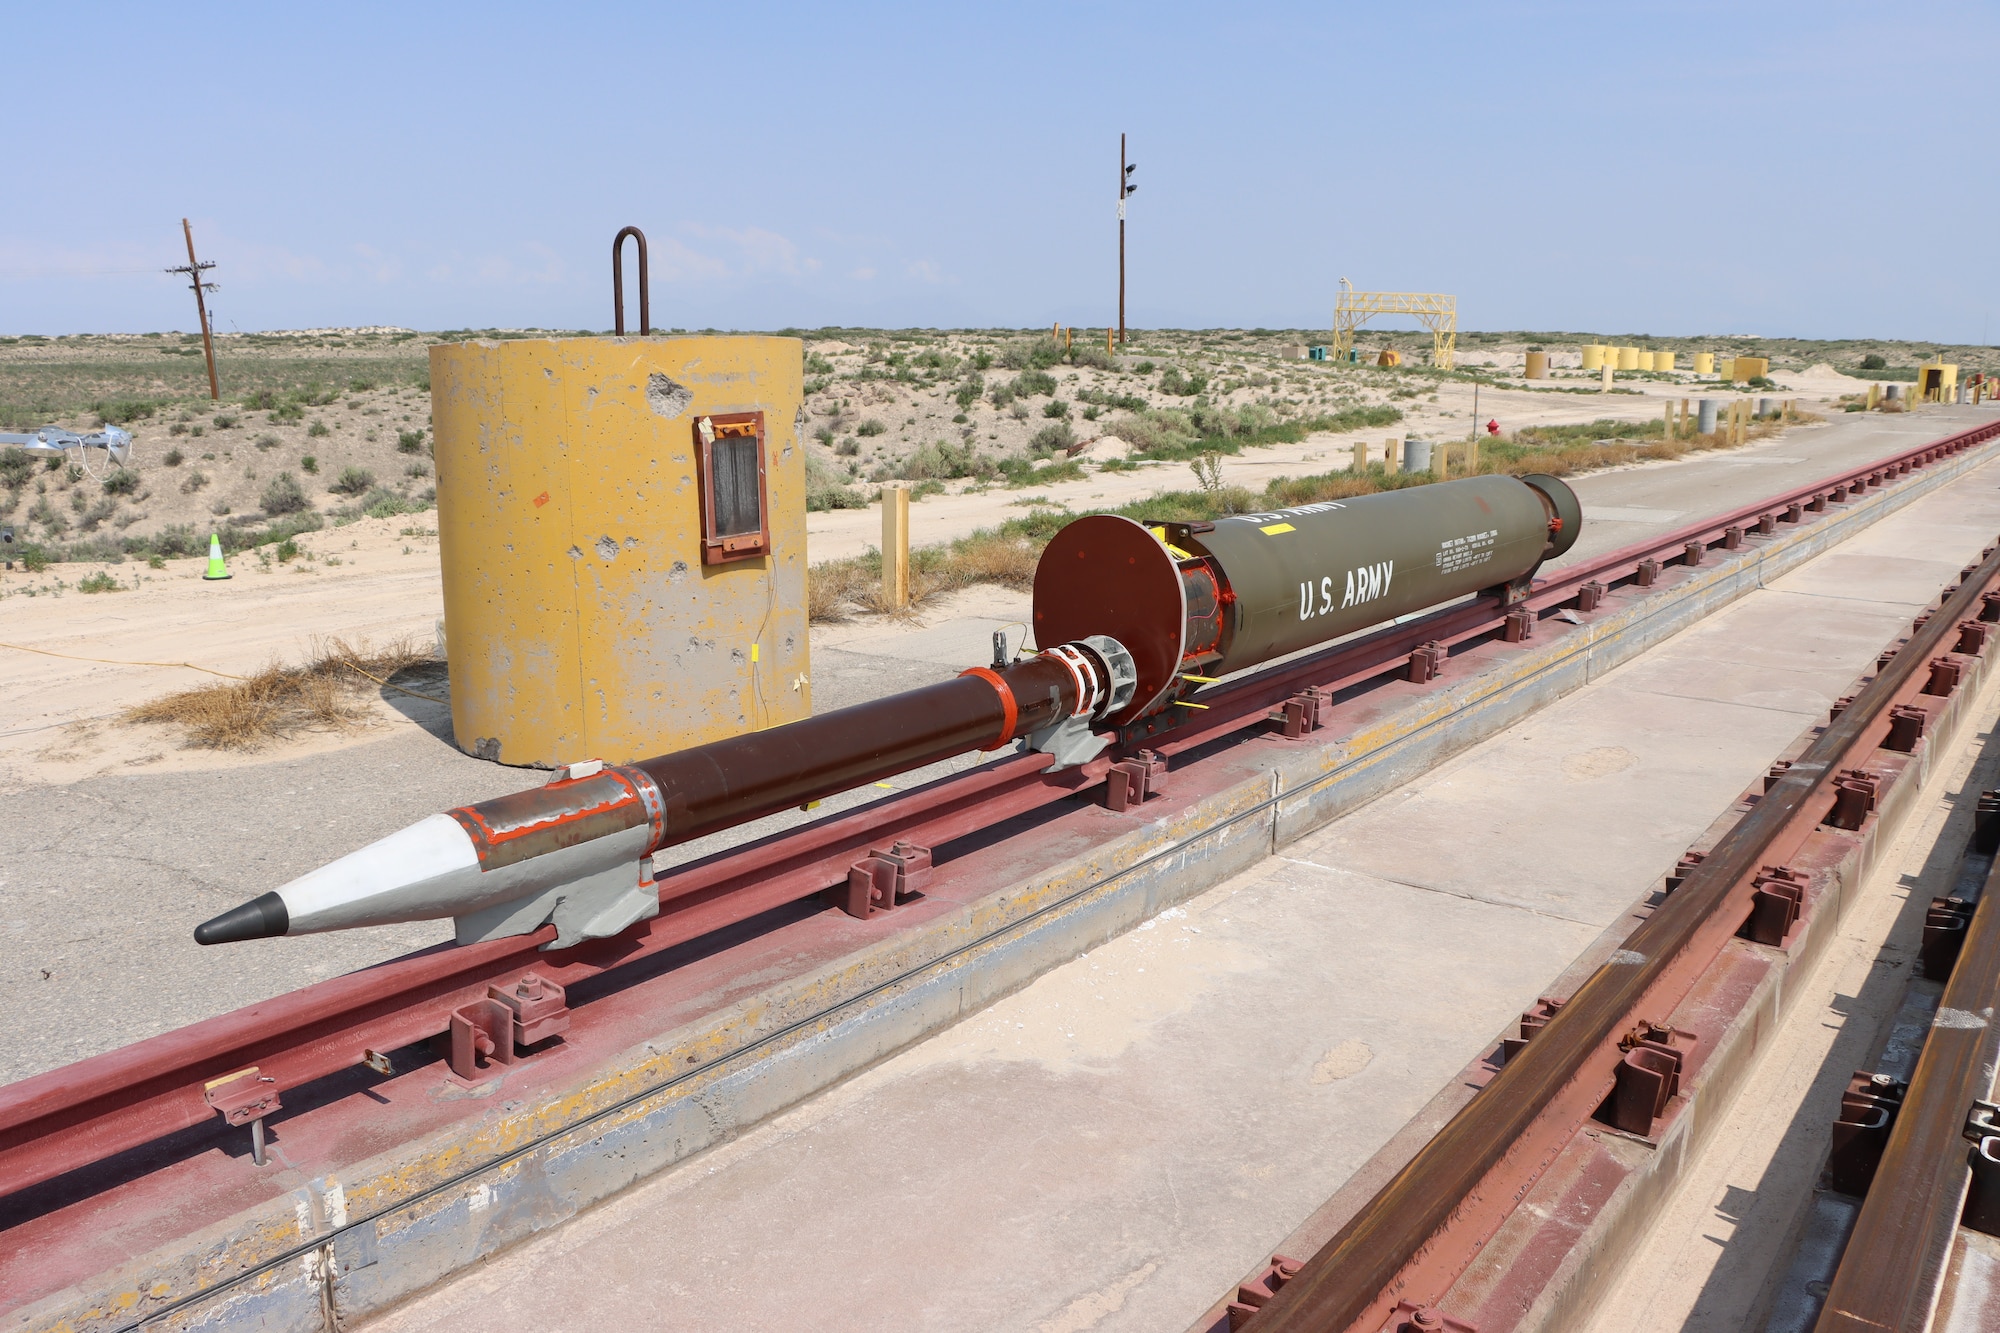 A hypersonic sled is ready to undergo a High Speed Recovery (HSR) test at the Arnold Engineering Development Complex High Speed Test Track at Holloman Air Force Base, New Mexico. During a test in July of this year, the sled traveled 5,300-feet per second on a monorail and was recovered as part of the HSR effort. (U.S. Air Force photo)